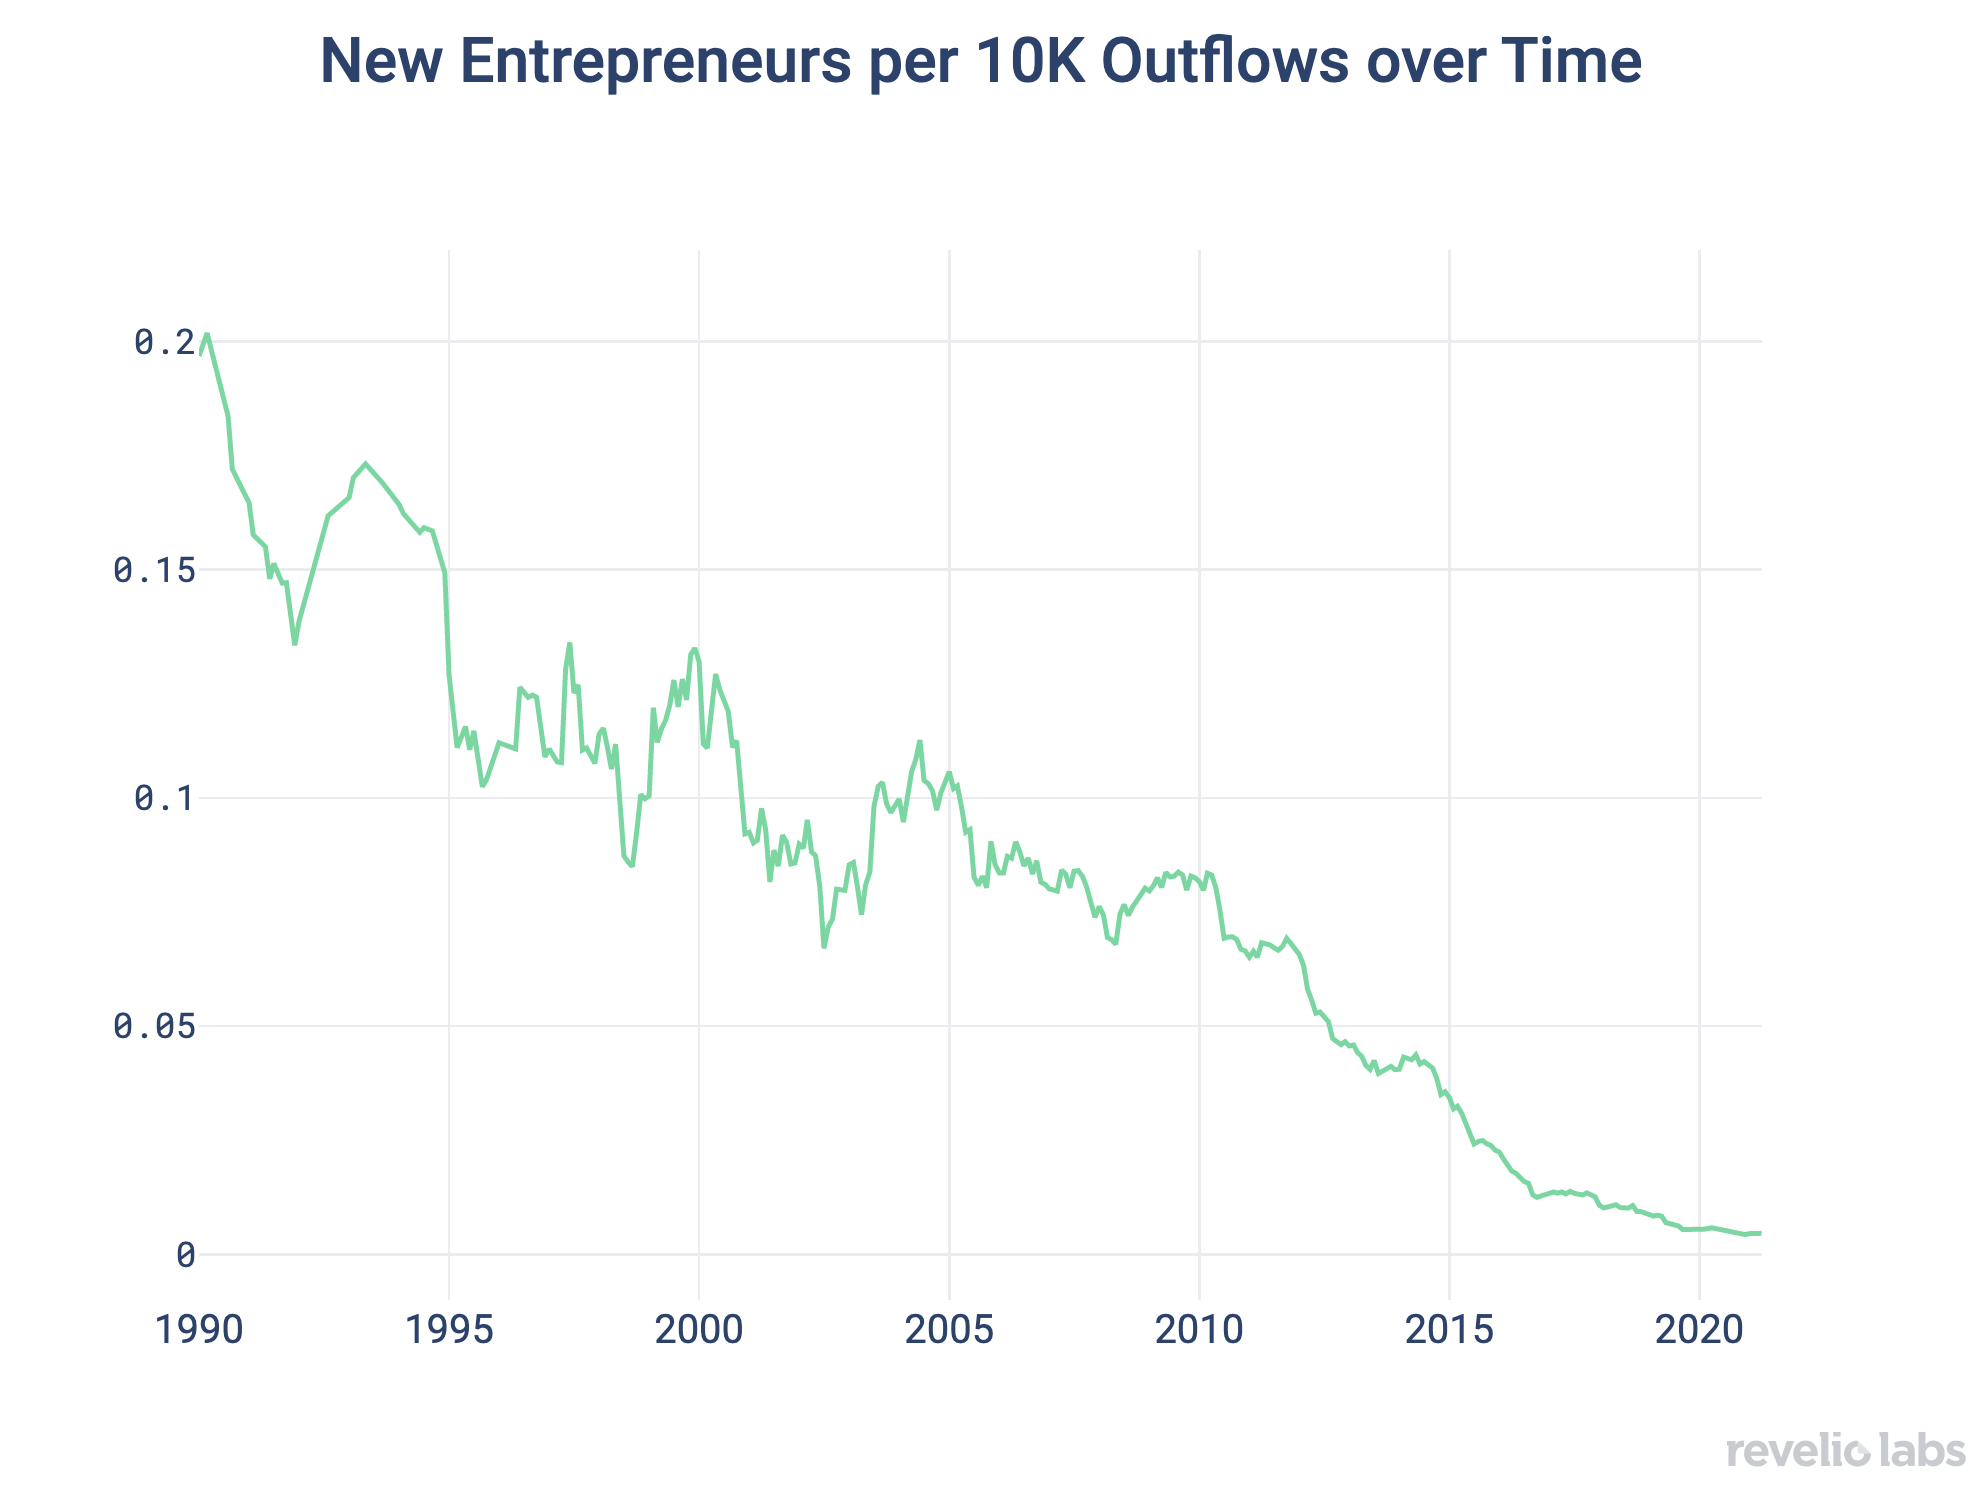 New Entrepreneur per 10K Outflows over Time